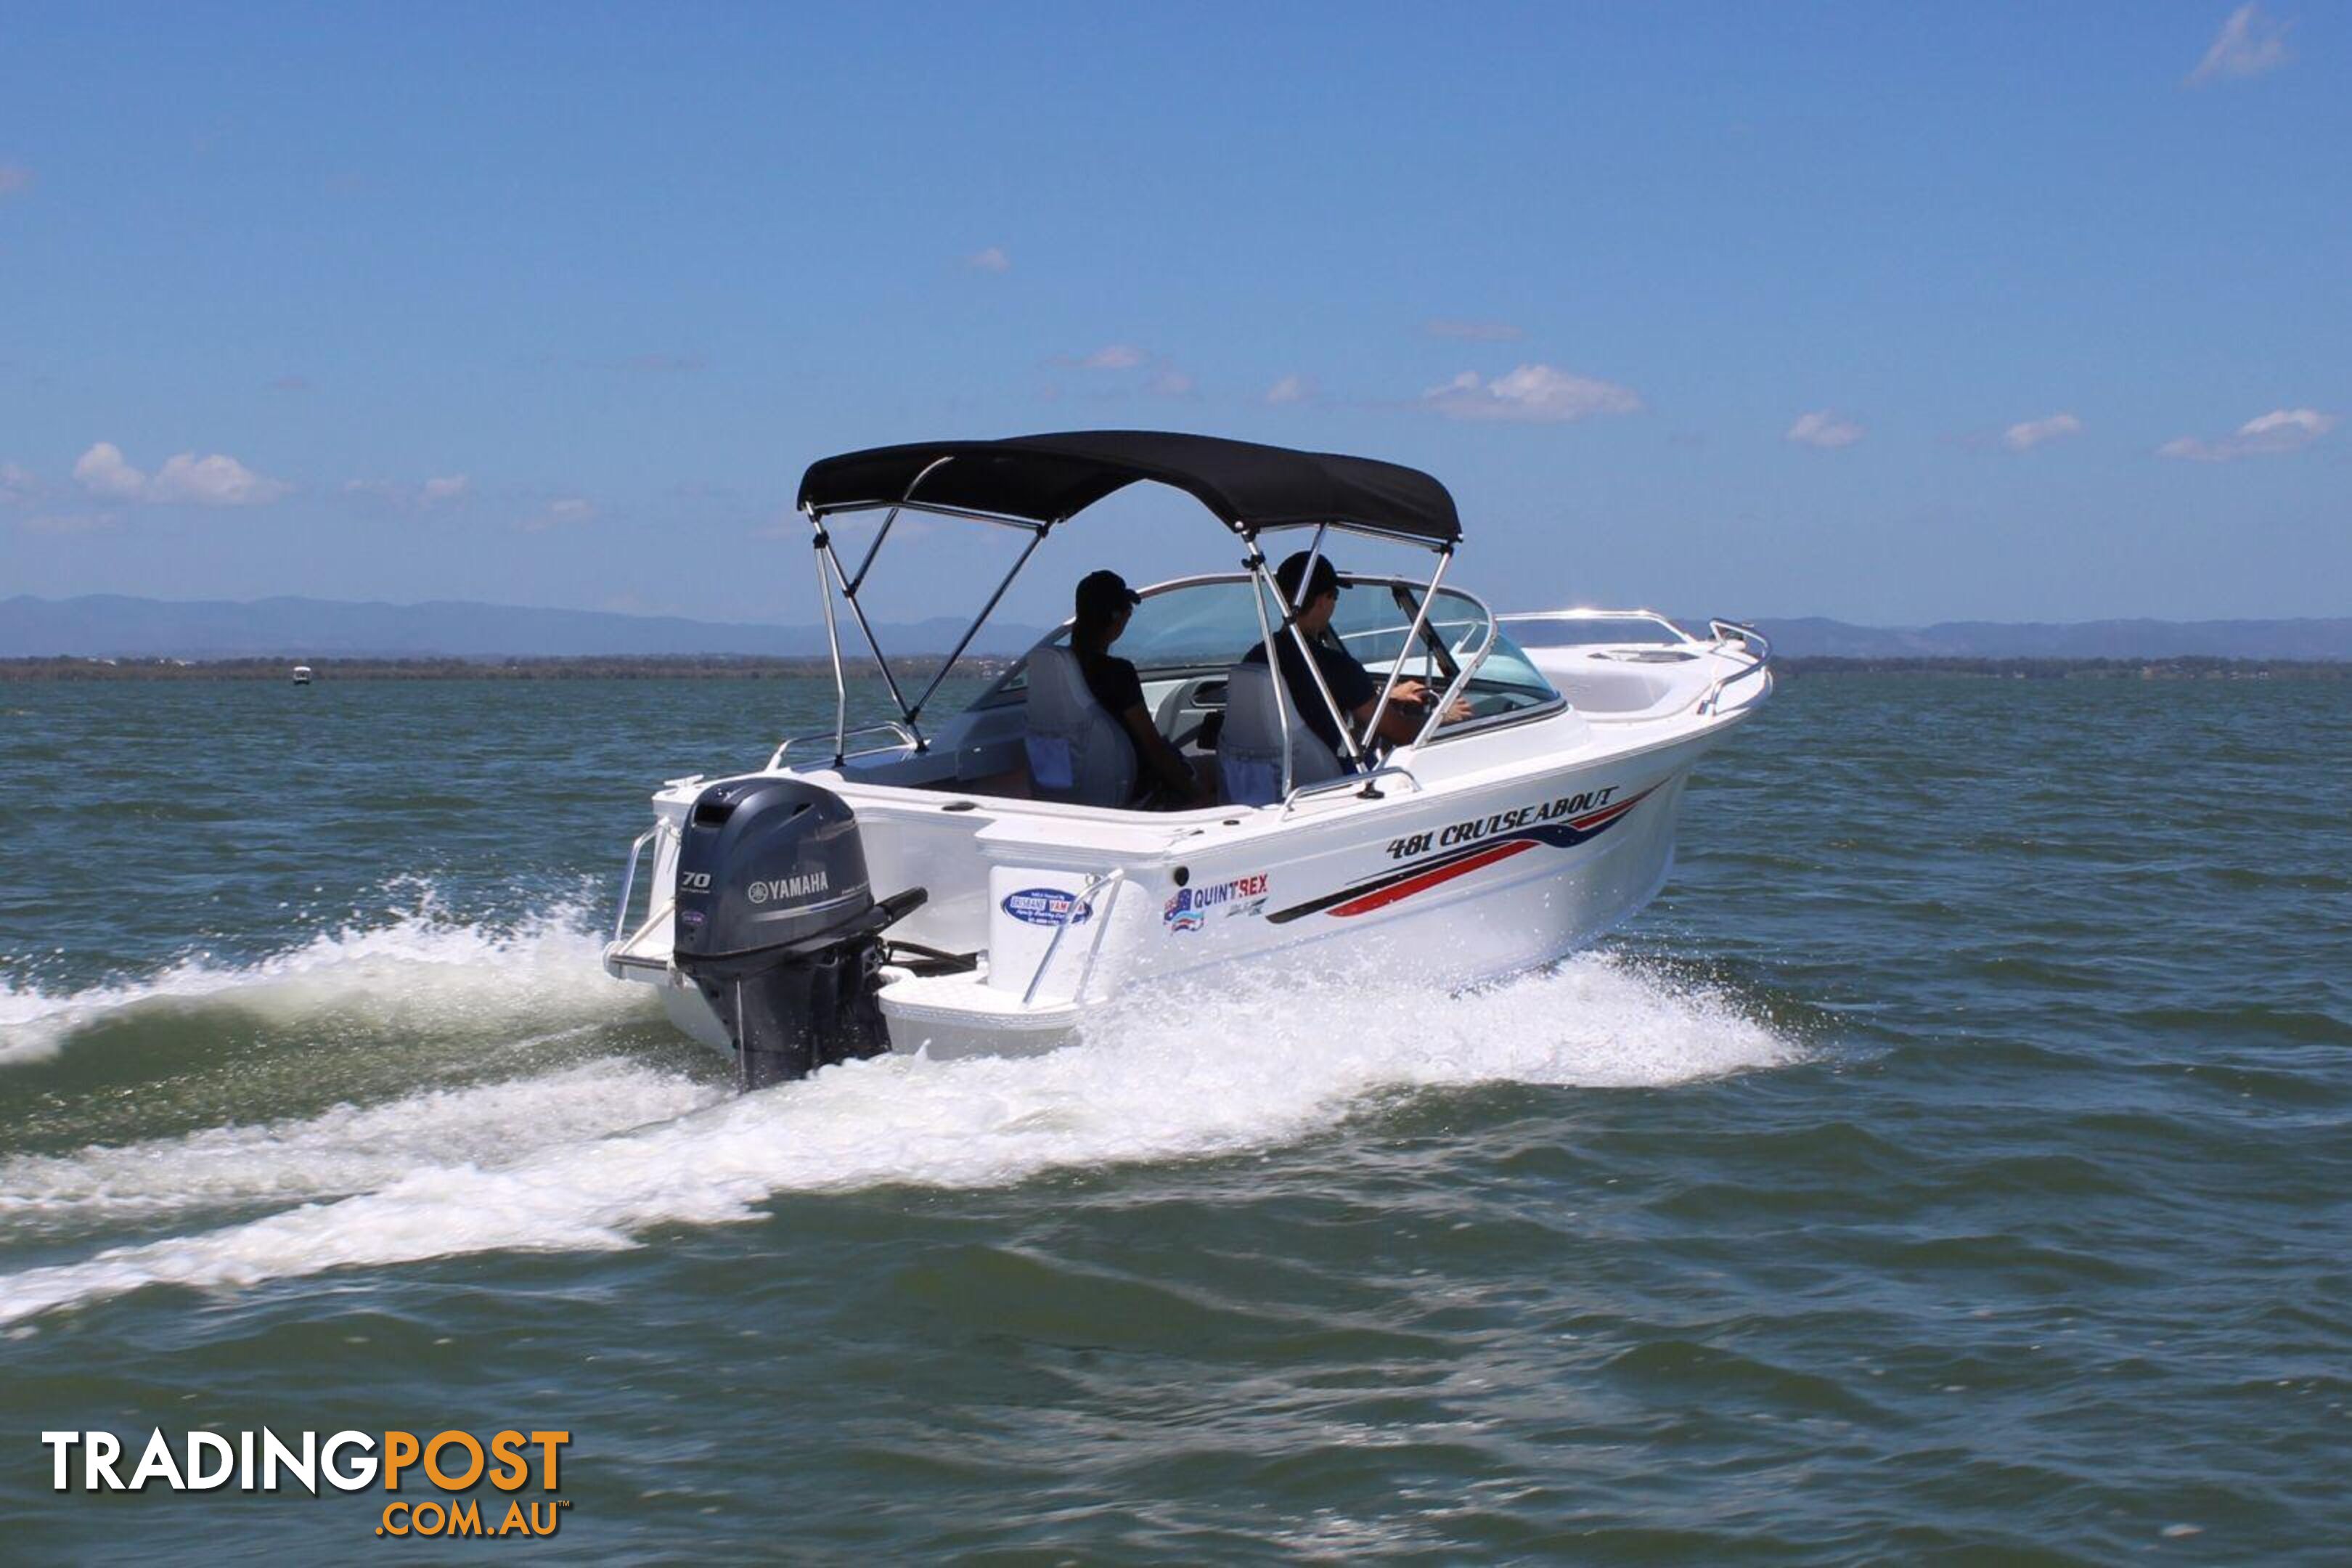 Quintrex Cruiseabout 481 + Yamaha F70hp 4-Stroke - Pack 3 for sale online prices